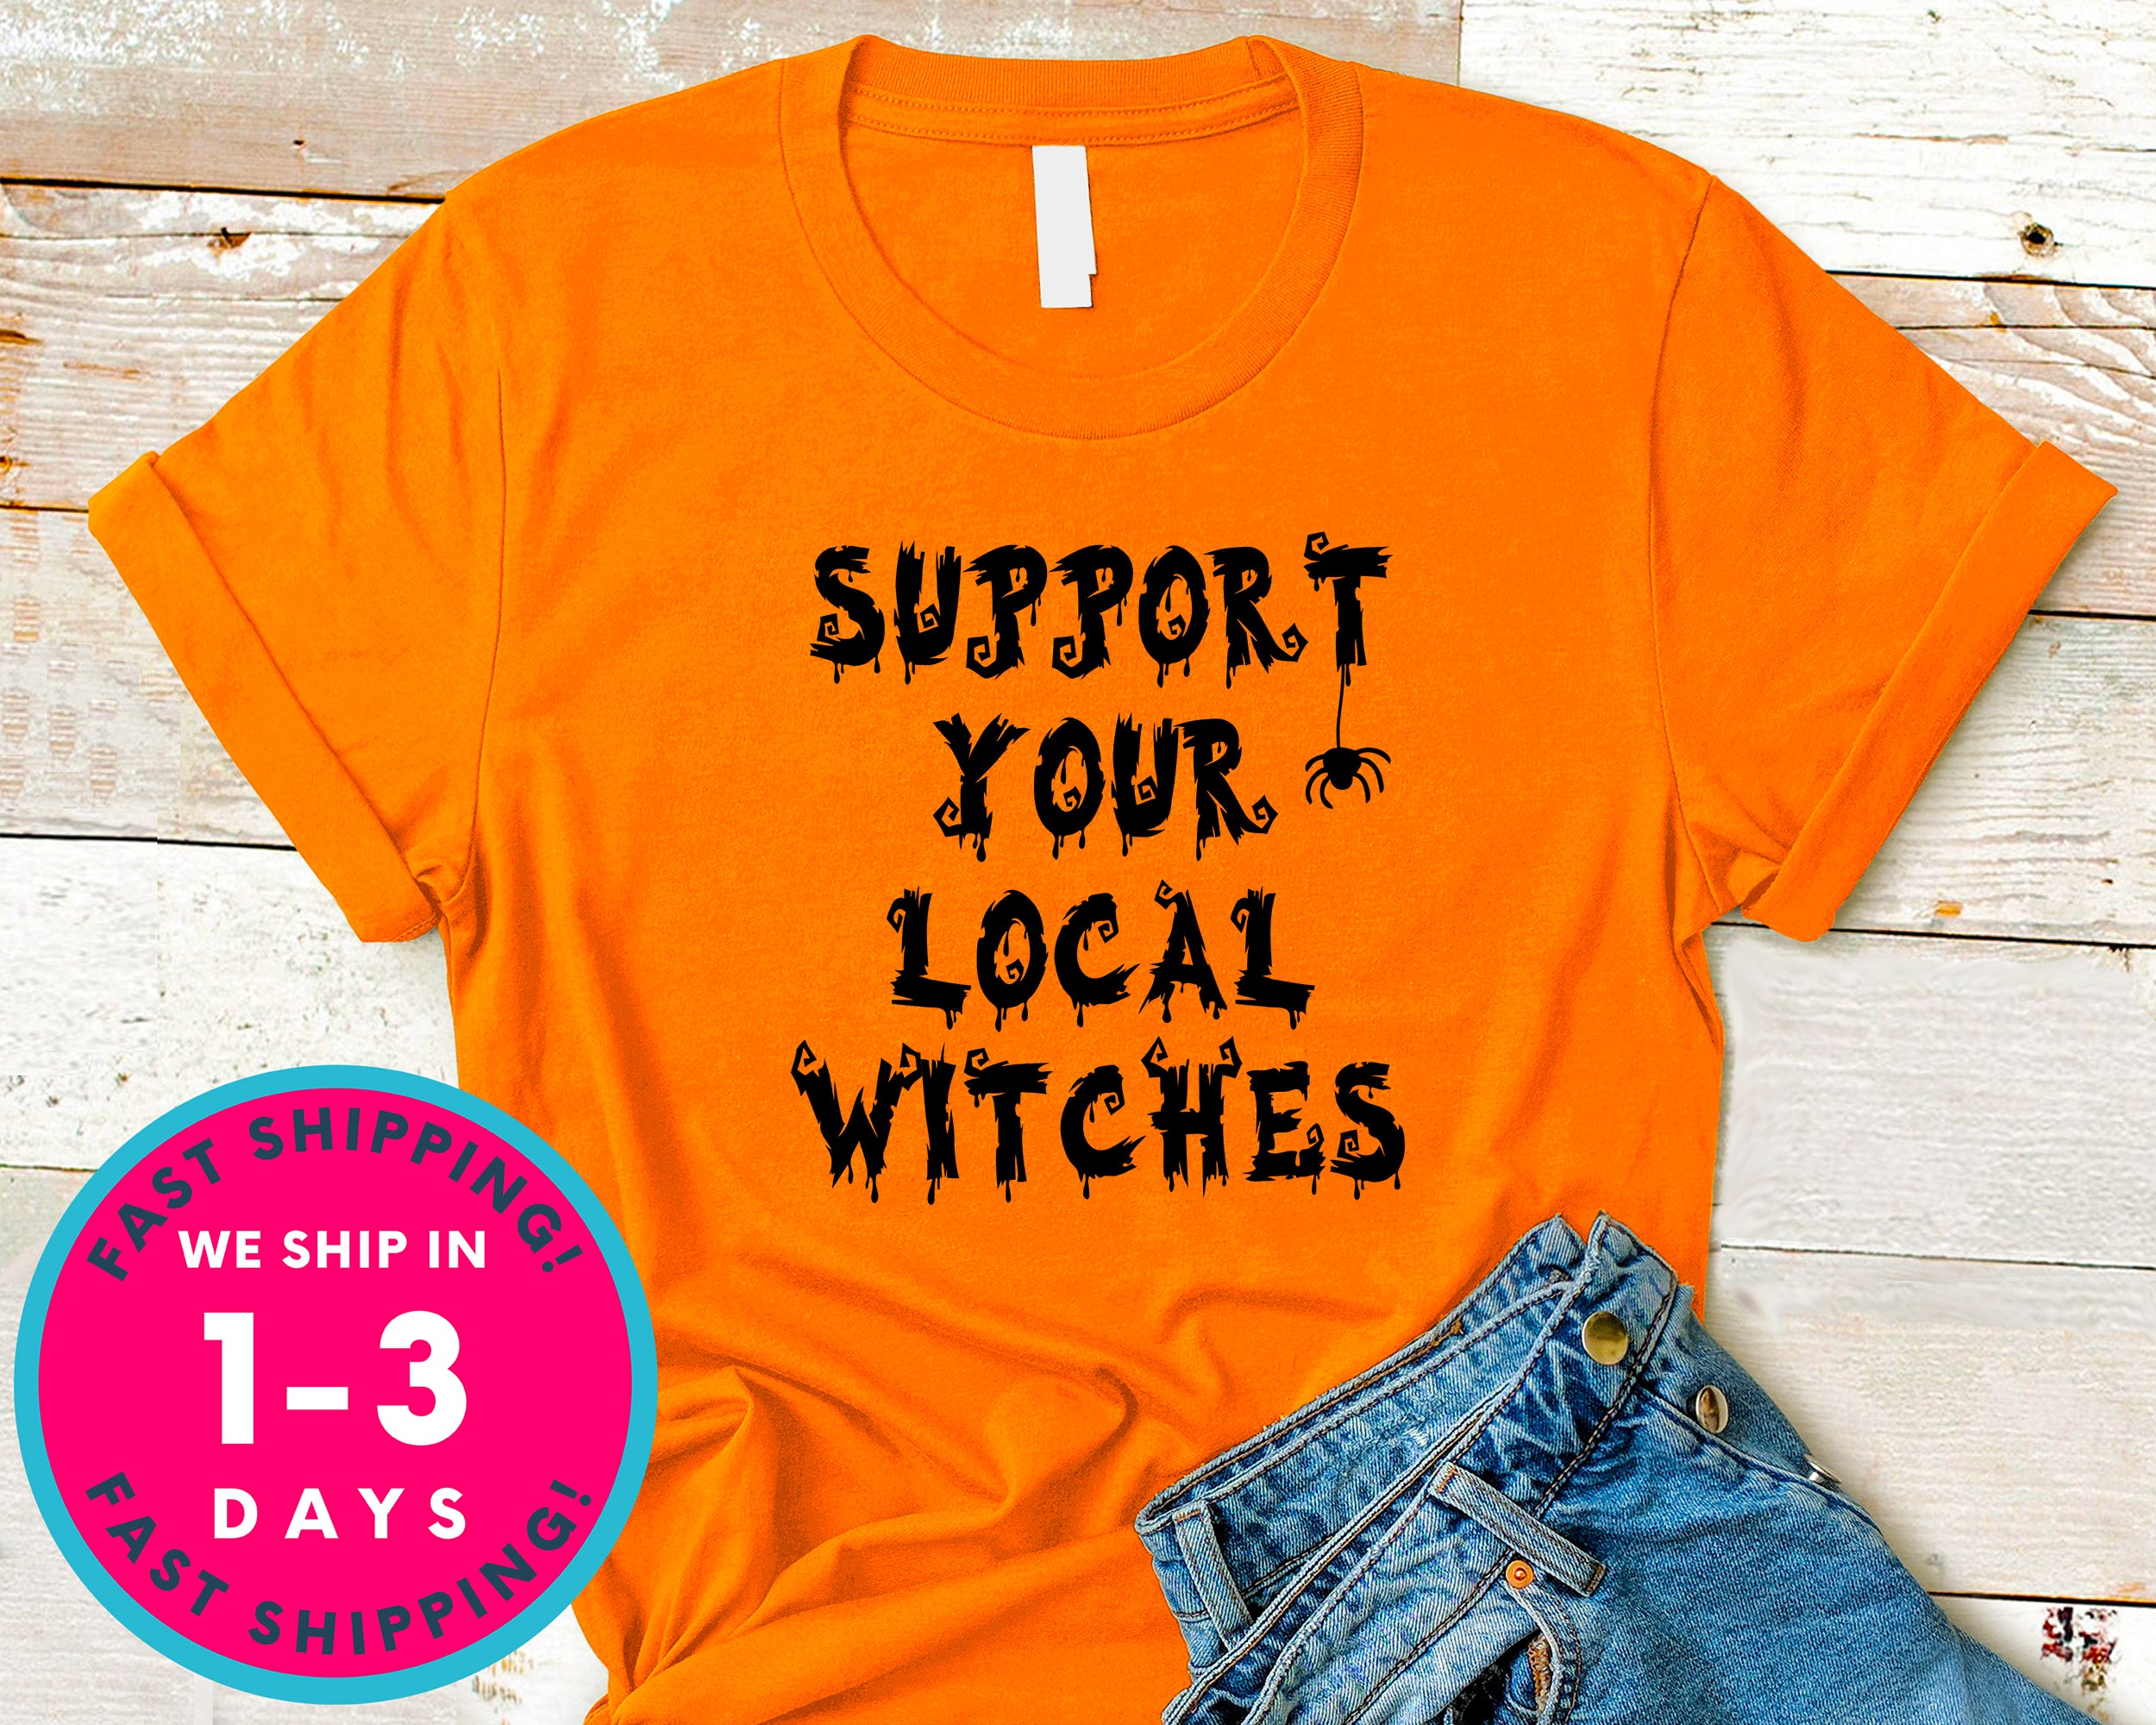 Witchcraft Pagan Support Your Local Witches T-Shirt - Halloween Horror Scary Shirt